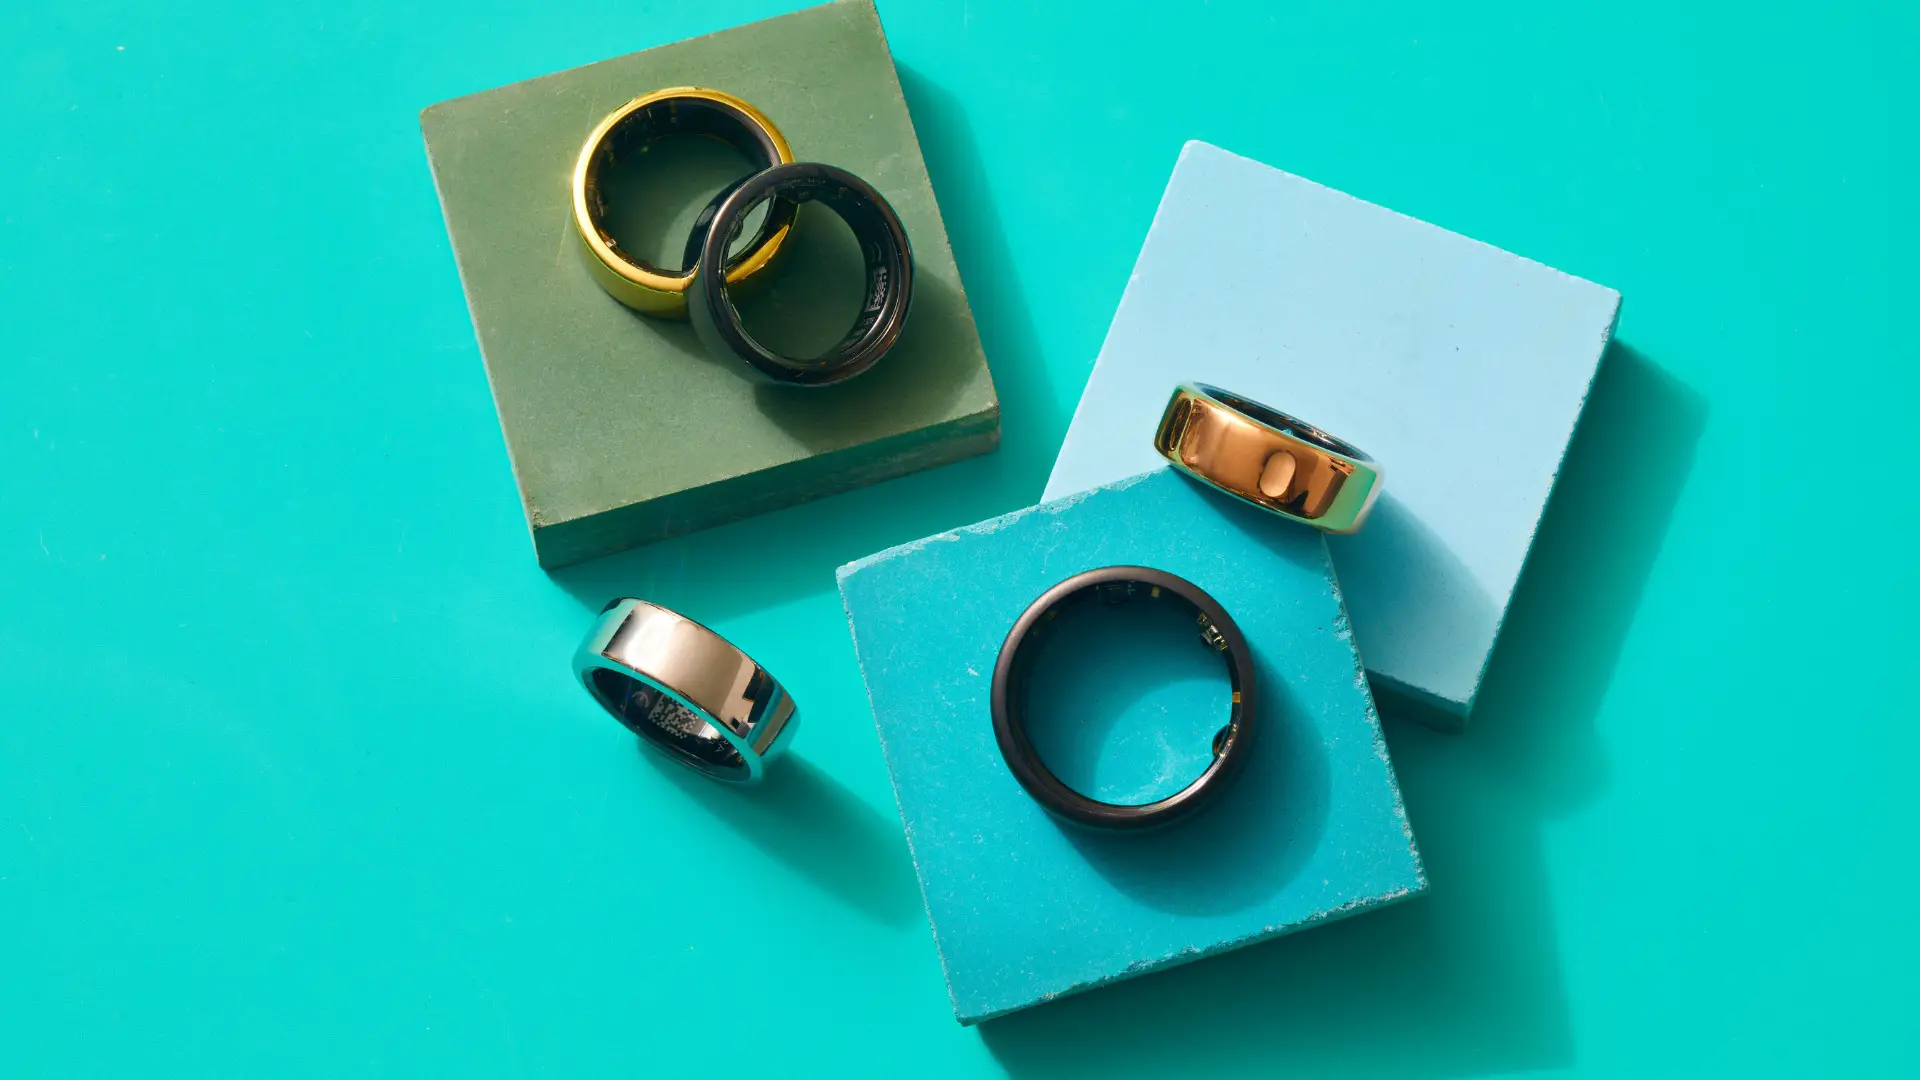 Oura Ring: Where to Buy for Fitness, Sleep & Health